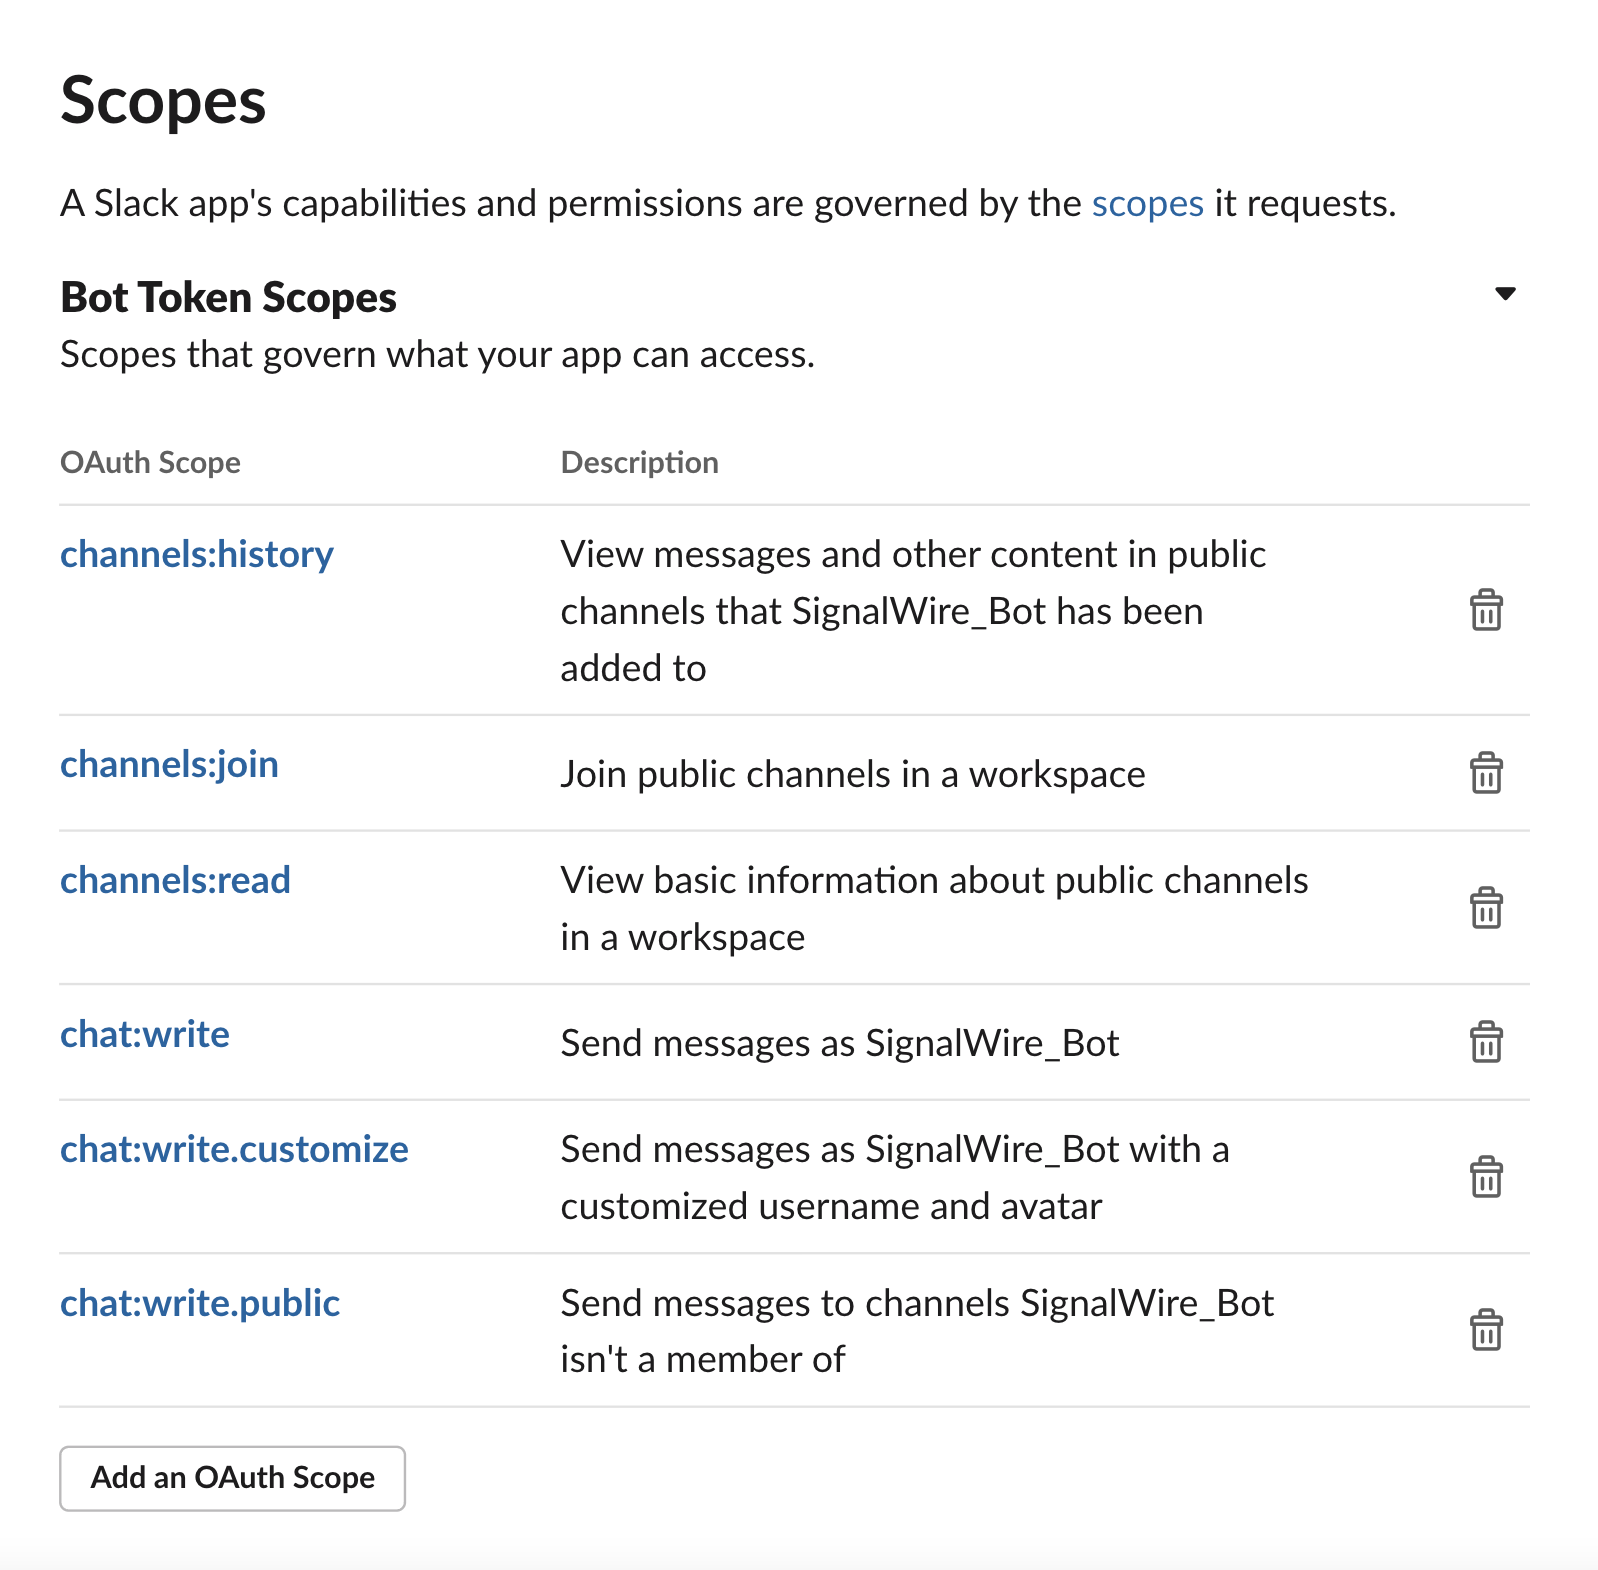 A screenshot of the Scopes page for the Slack app, showing the described OAuth Scope items added under Bot Token Scopes.